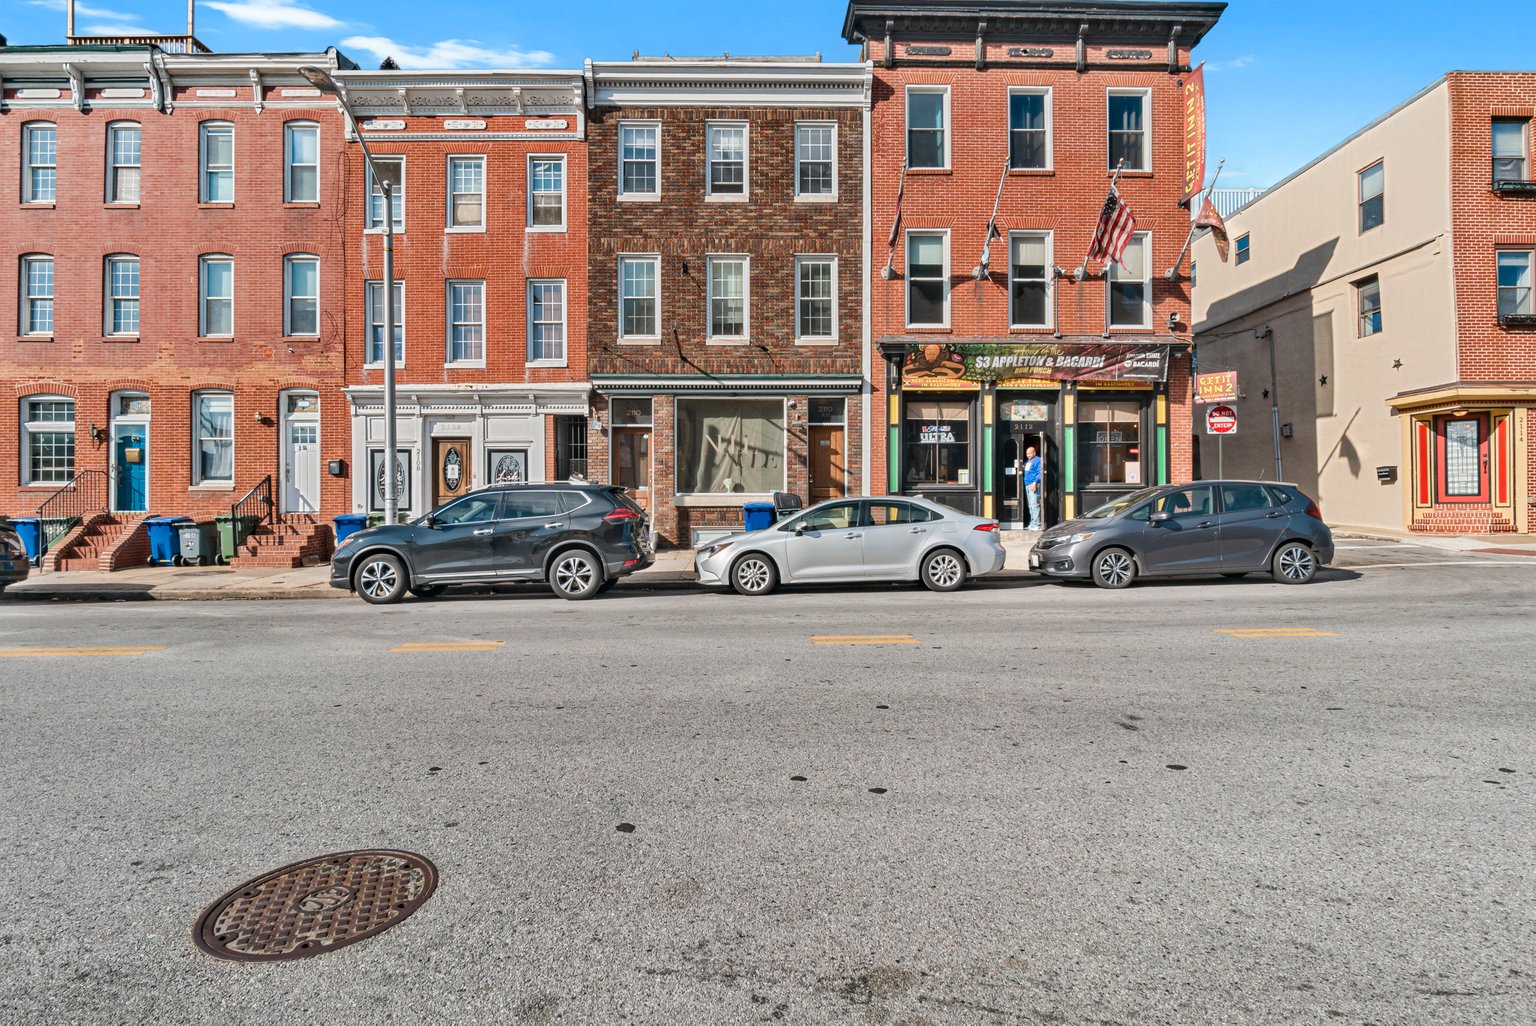 2110 Fleet Street: 2 Apartments/ 1 Large Retail Space in Canton/ Well Maintained/ 16.9% Projected Cash on Cash Return